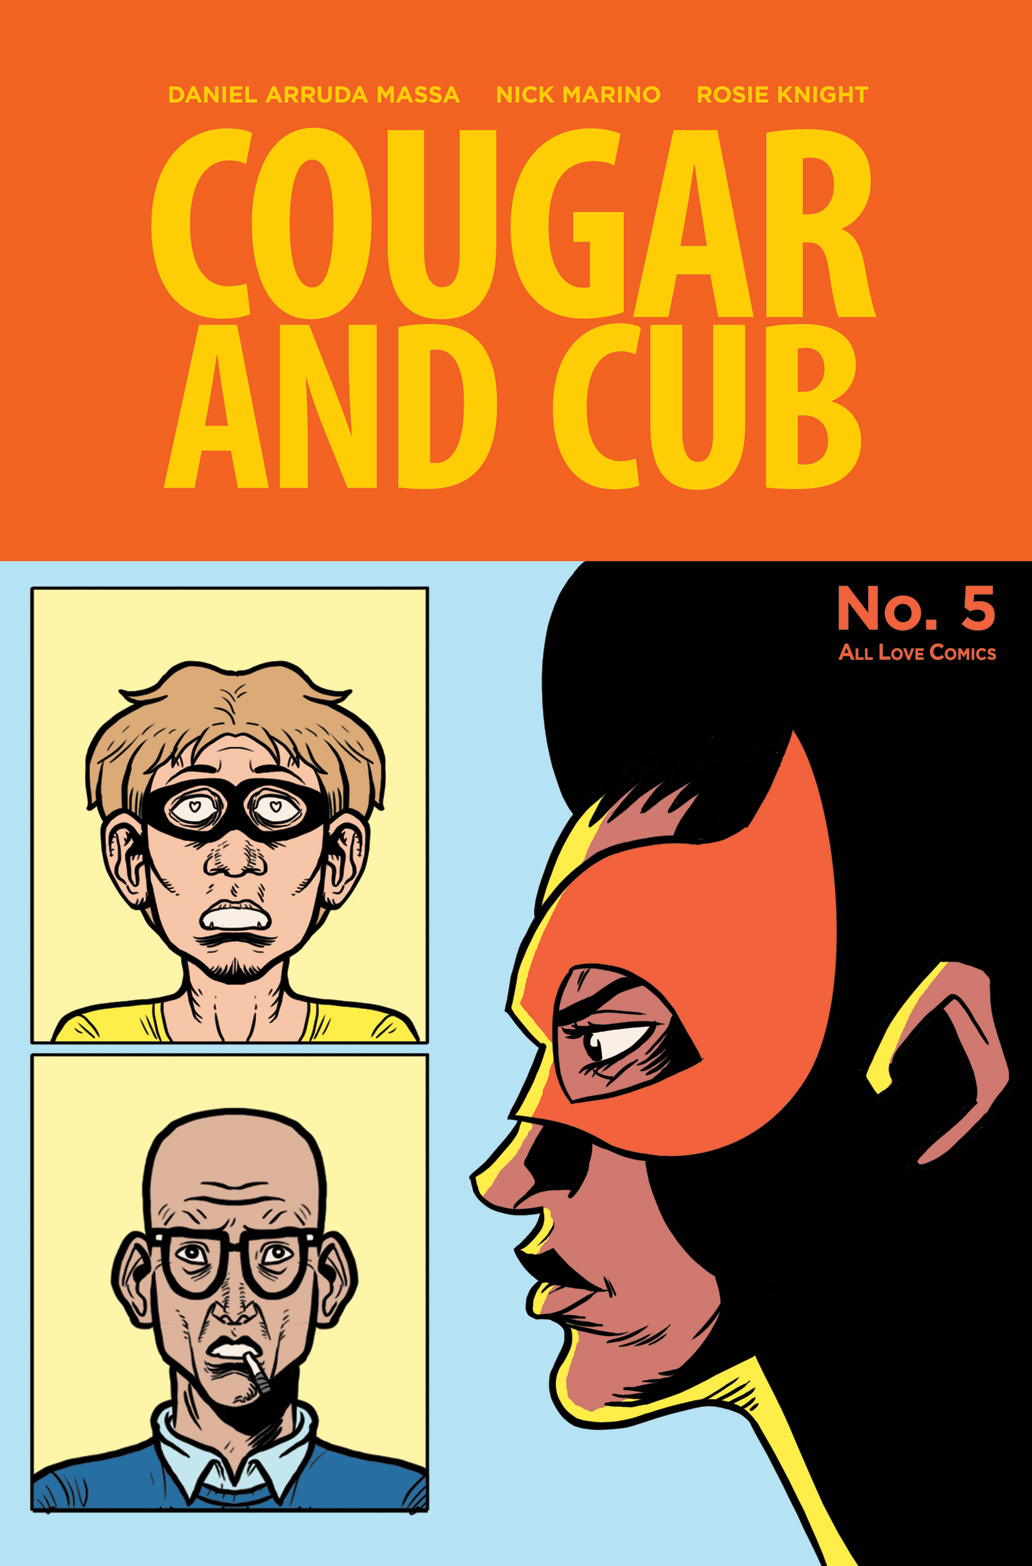 Cougar and Cub #5 flashback cover